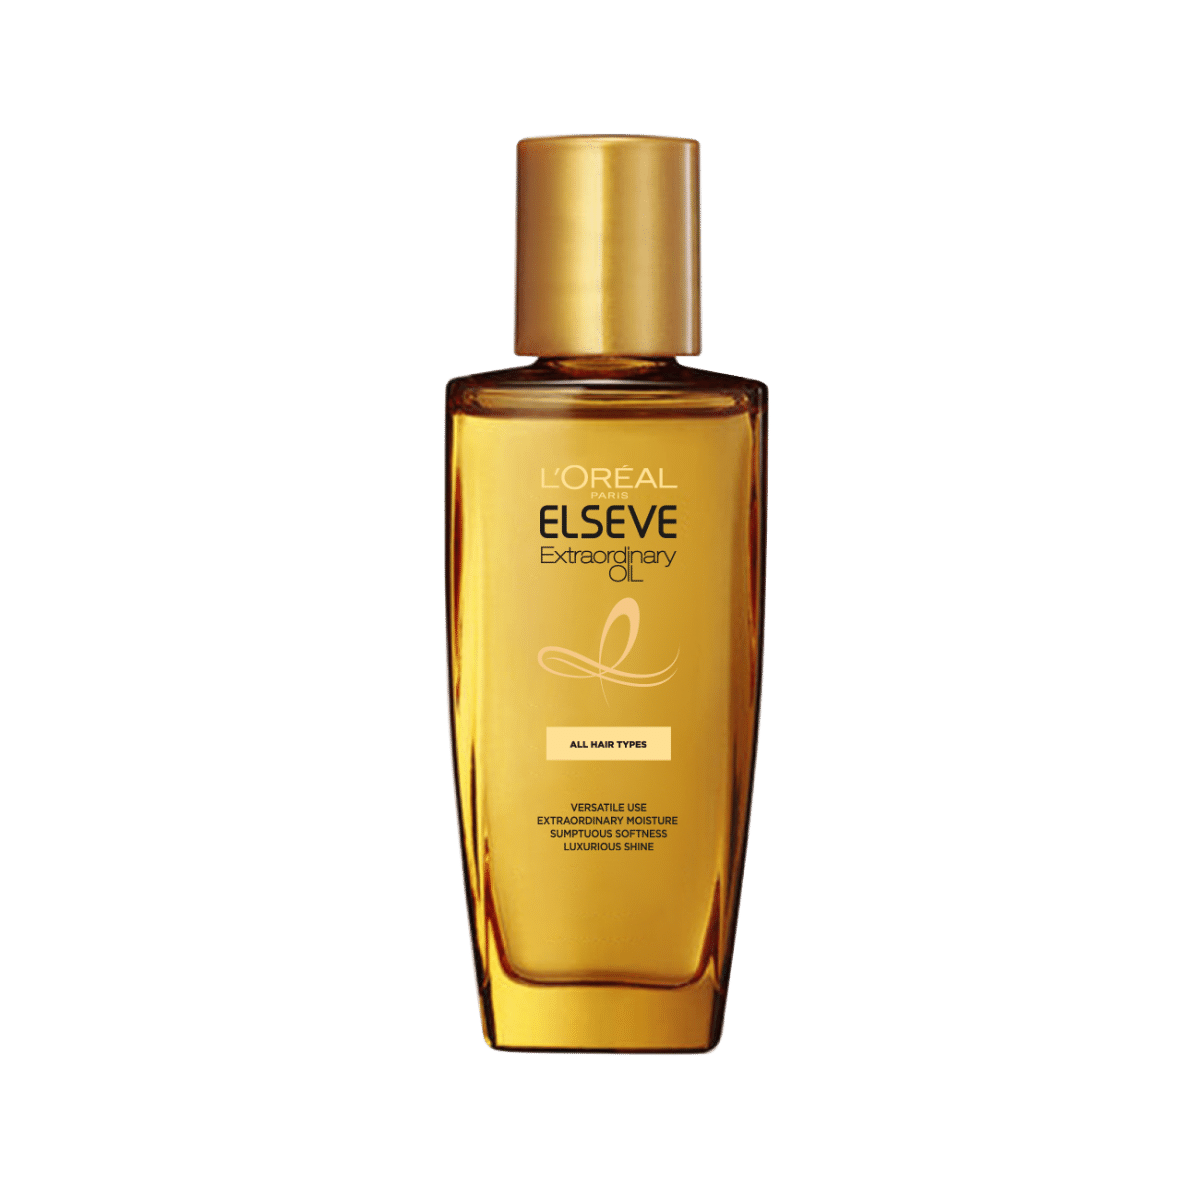 LOreal Paris Loreal Paris Extraordinary Oil Serum 100 ml in Bangalore at  best price by Lifestyle Store Mantri Square Mall  Justdial